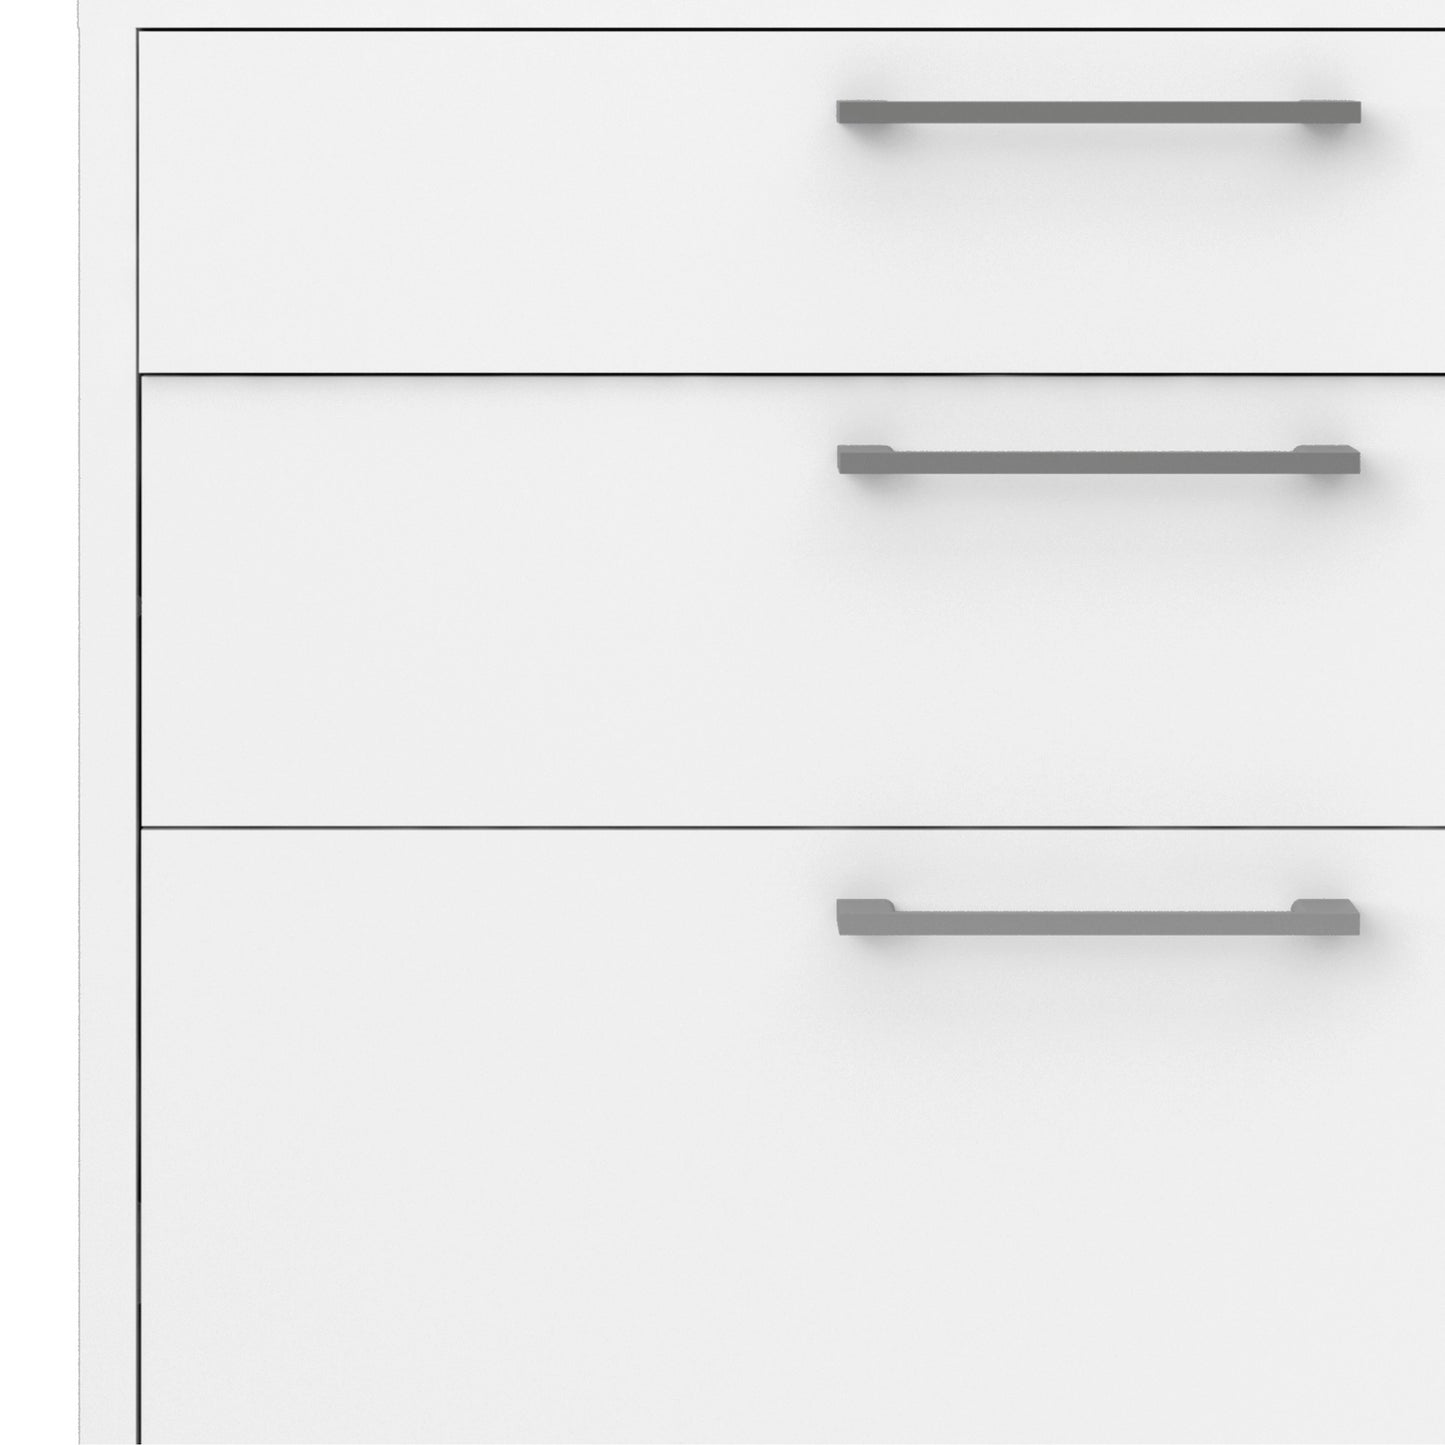 Furniture To Go Prima Bookcase 2 Shelves with 2 Drawers + 2 File Drawers in White